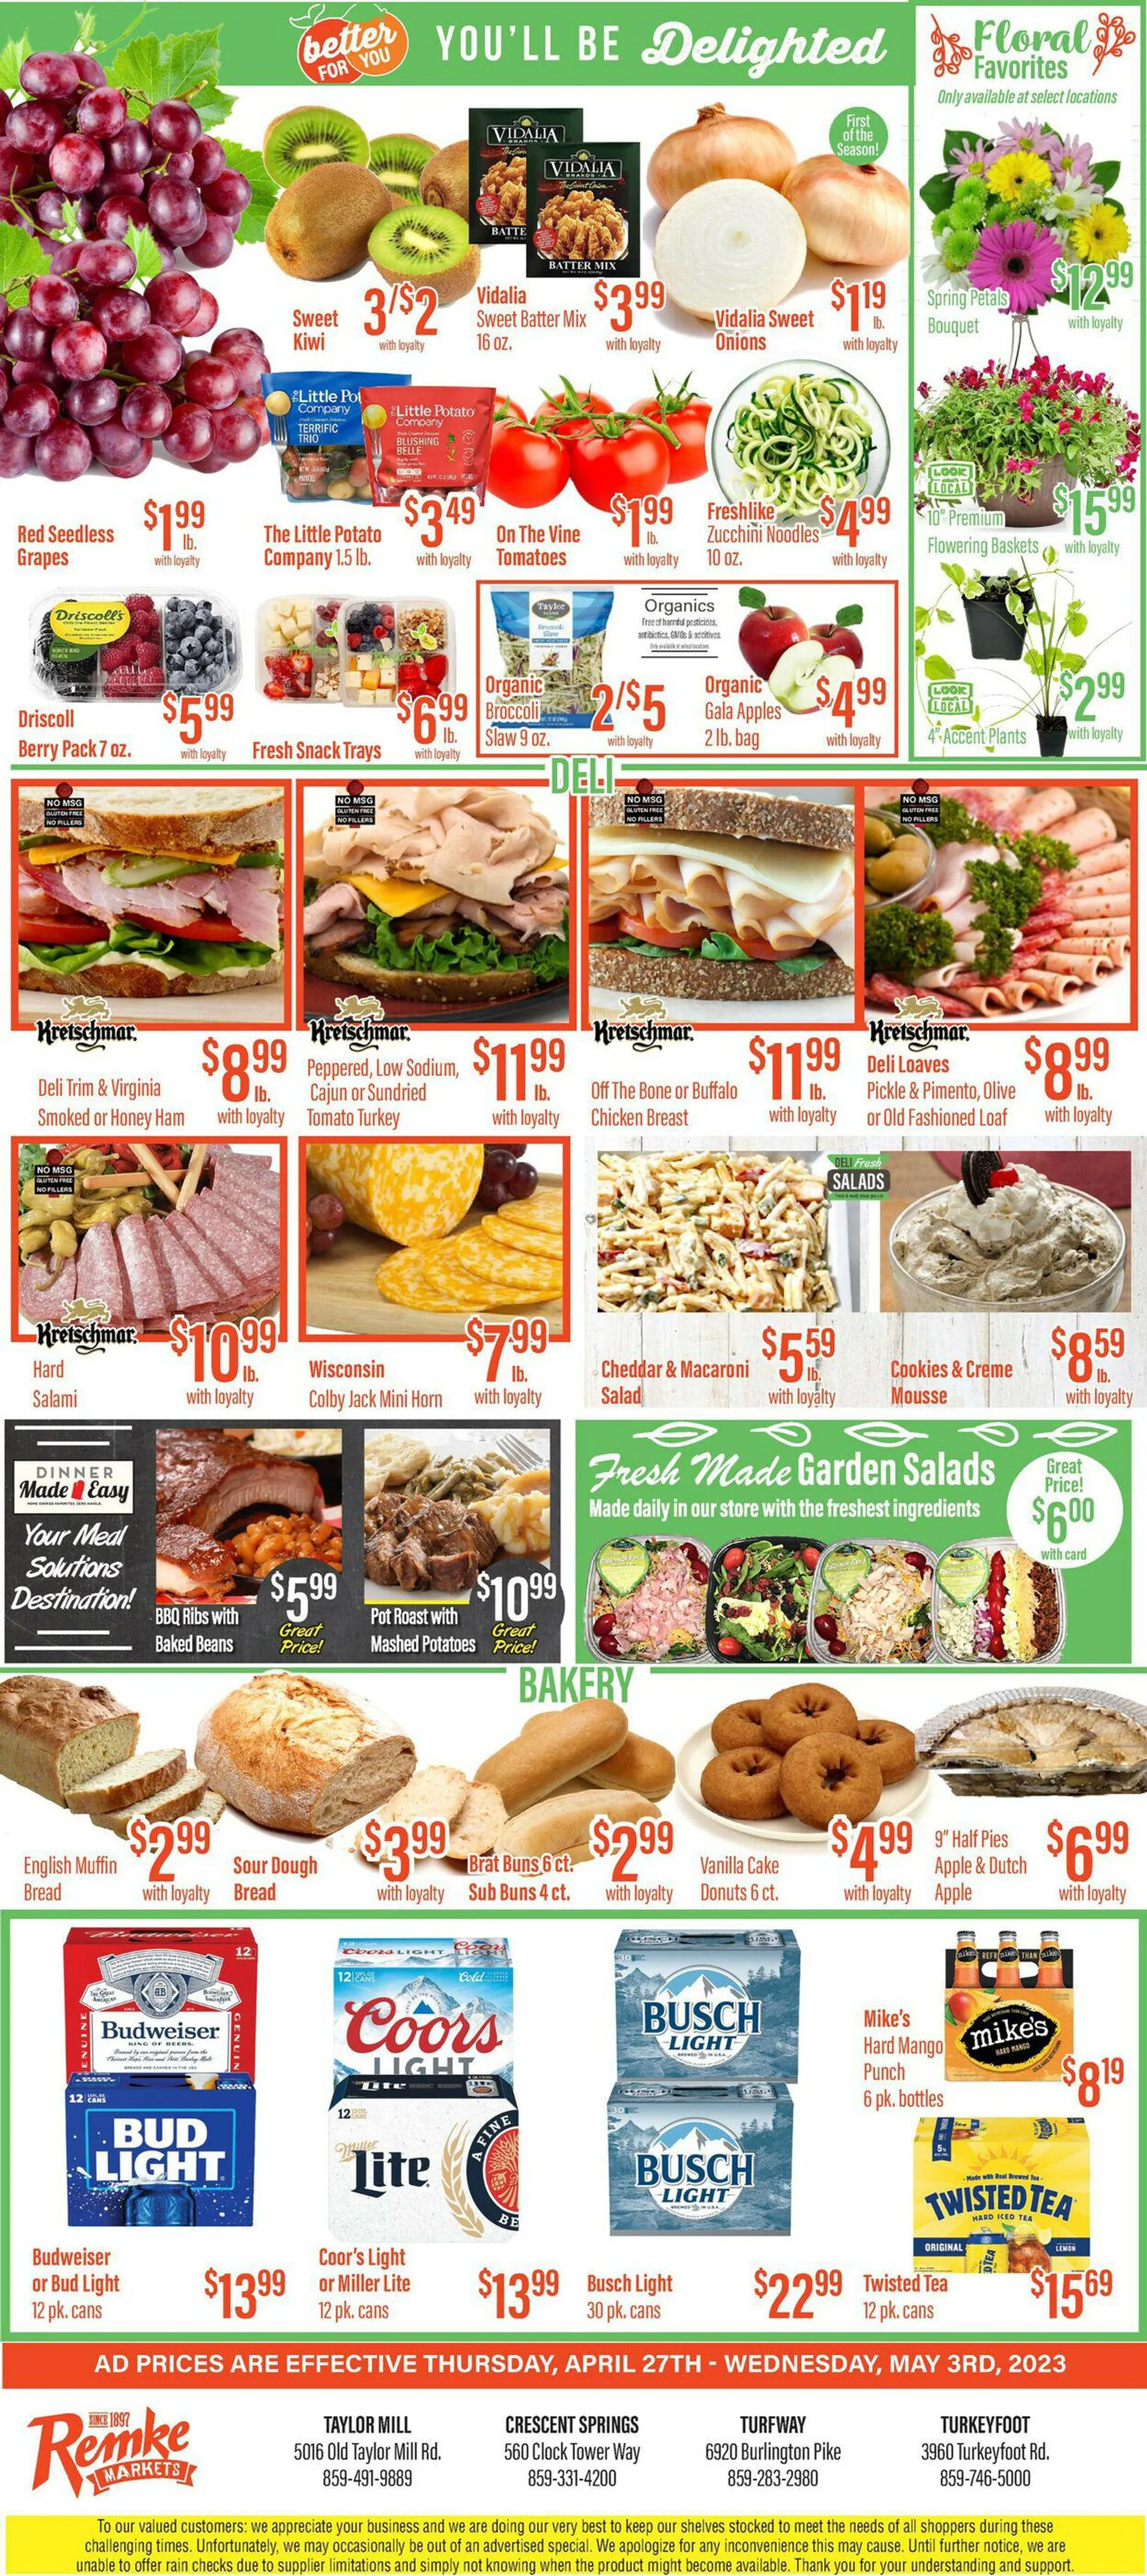 Remke Markets Current weekly ad - 7